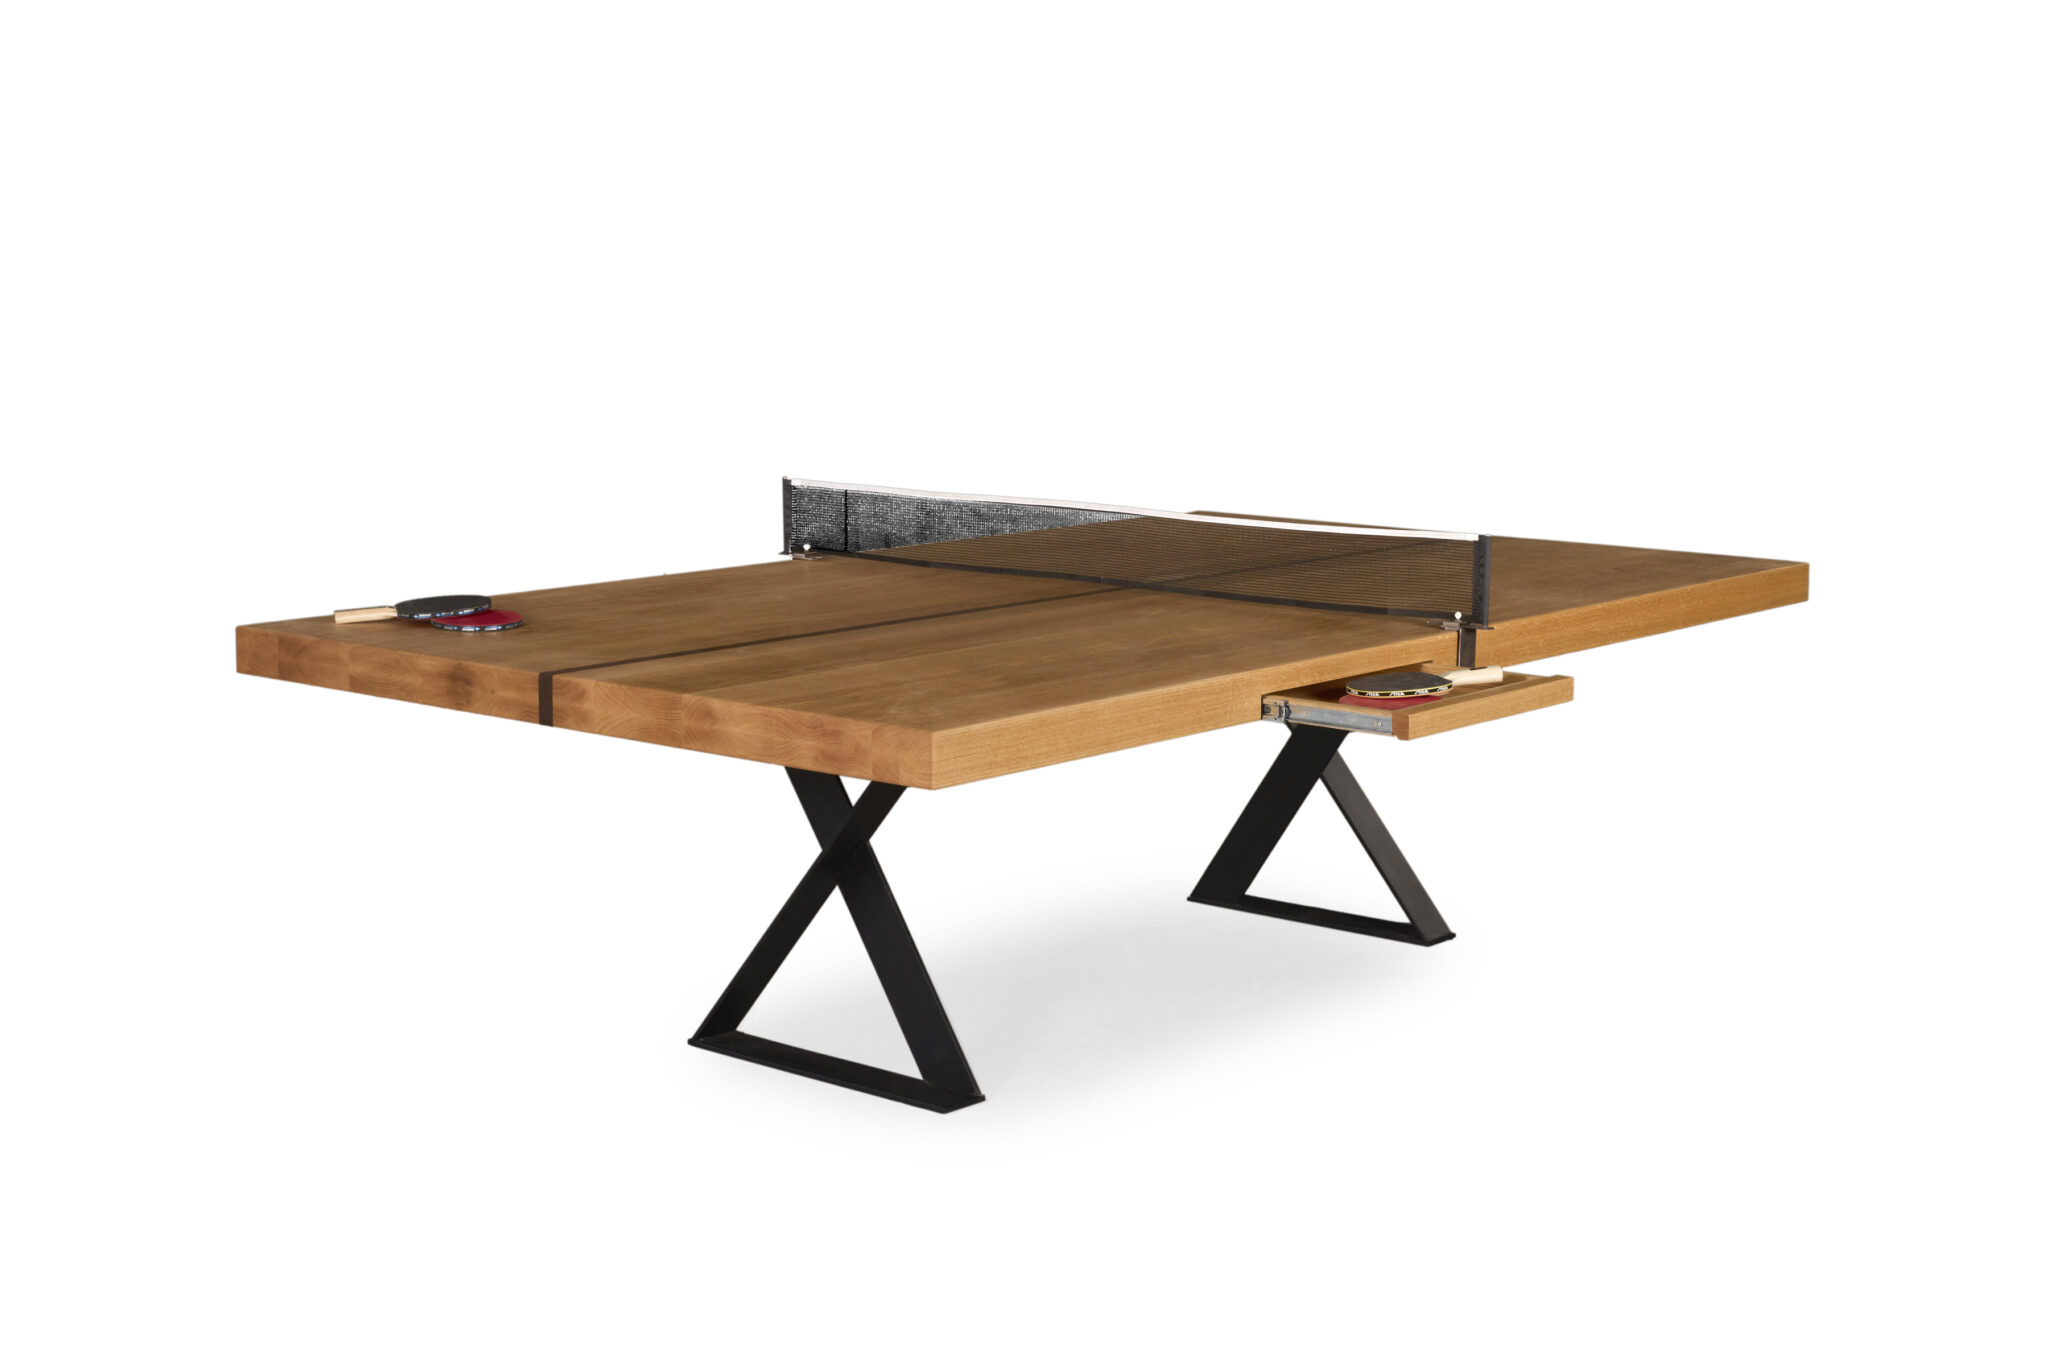 Wimbledon Dining Table, a versatile piece crafted from Oak, Victoria Ash, and Walnut Natural timbers, serving as both a dining table and table tennis table. Measures 2750mm x 1530mm x 750mm.